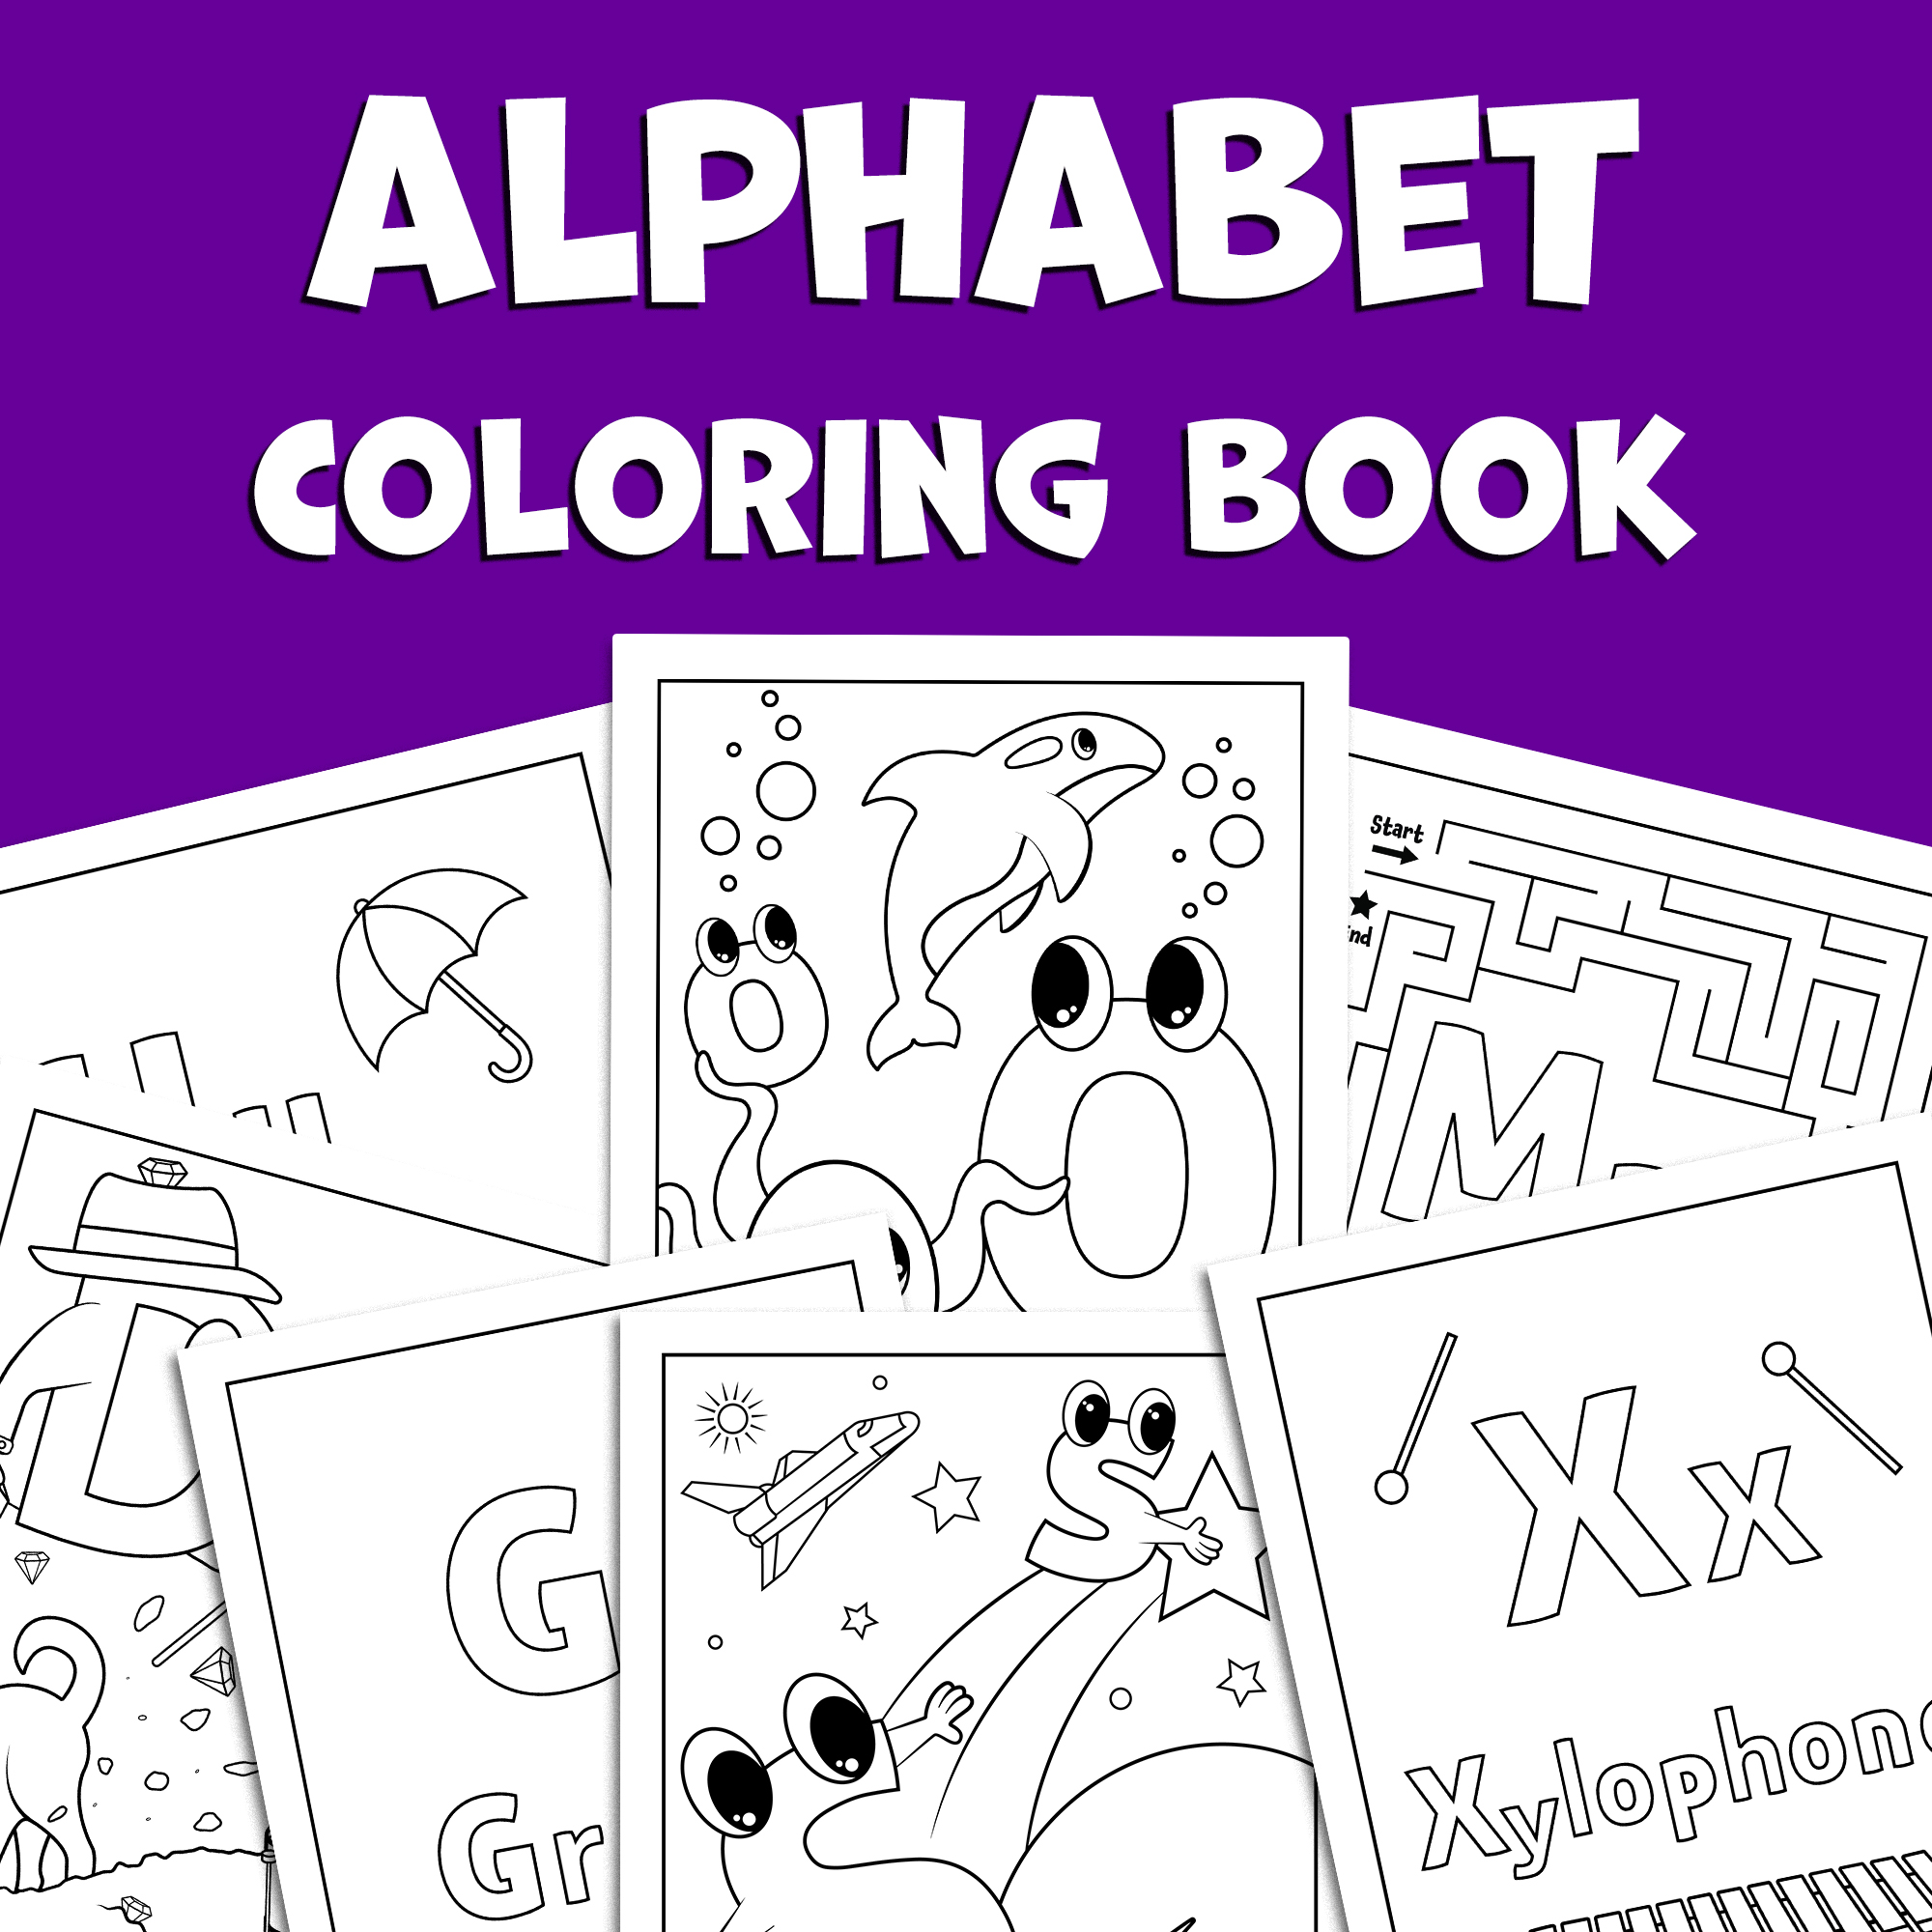 Alphabet coloring book abc coloring pages made by teachers